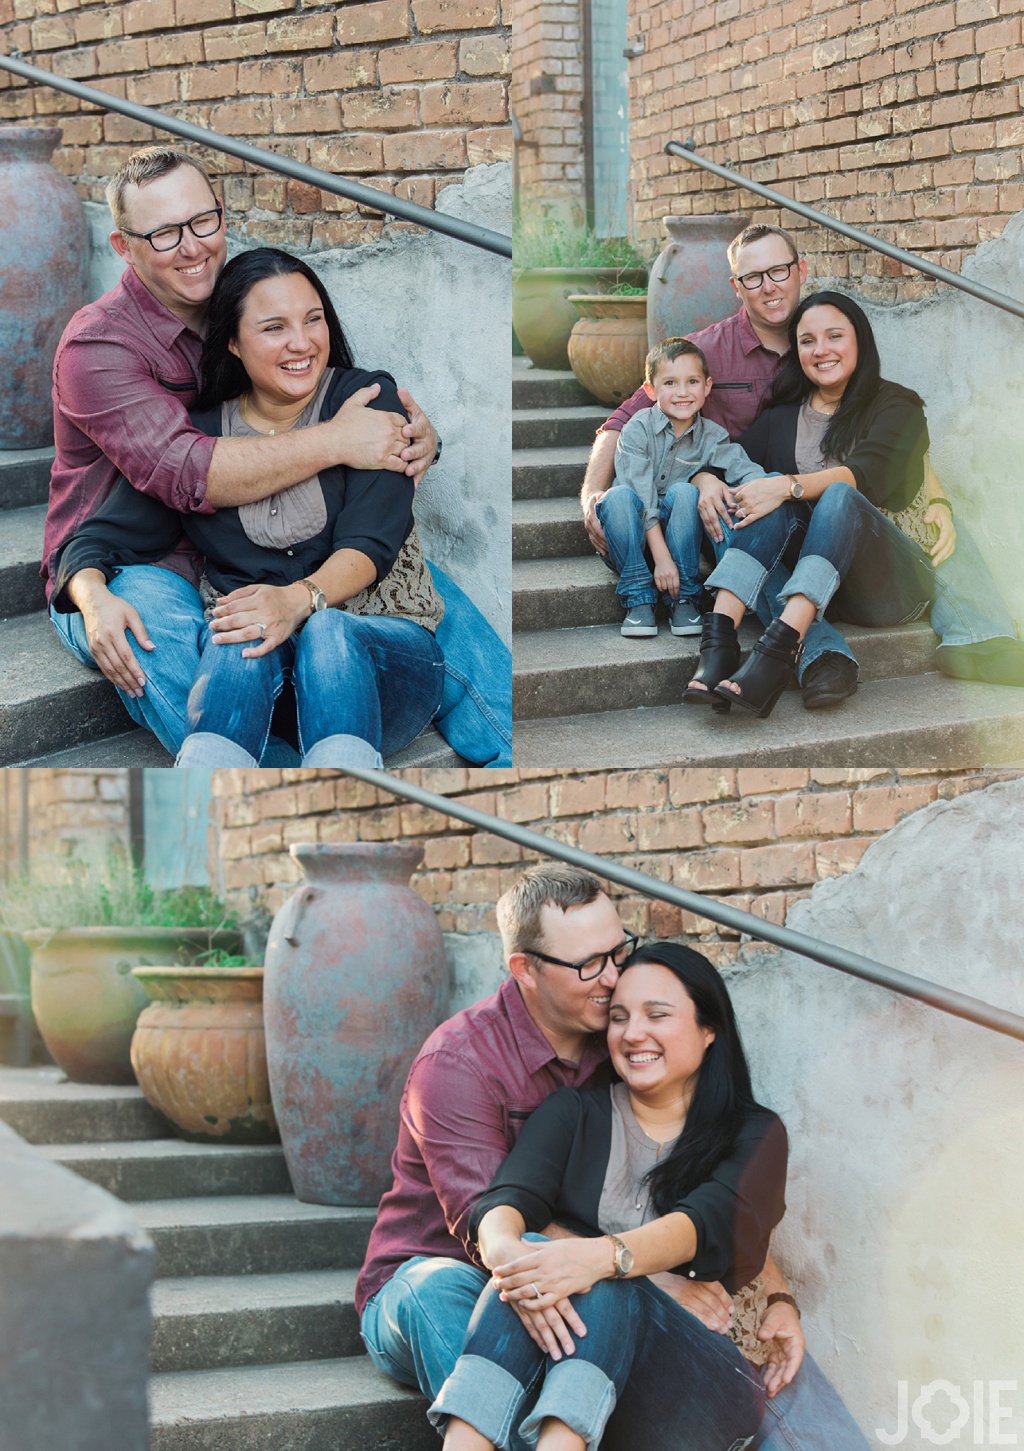 Megan and Mike's Houston engagement session